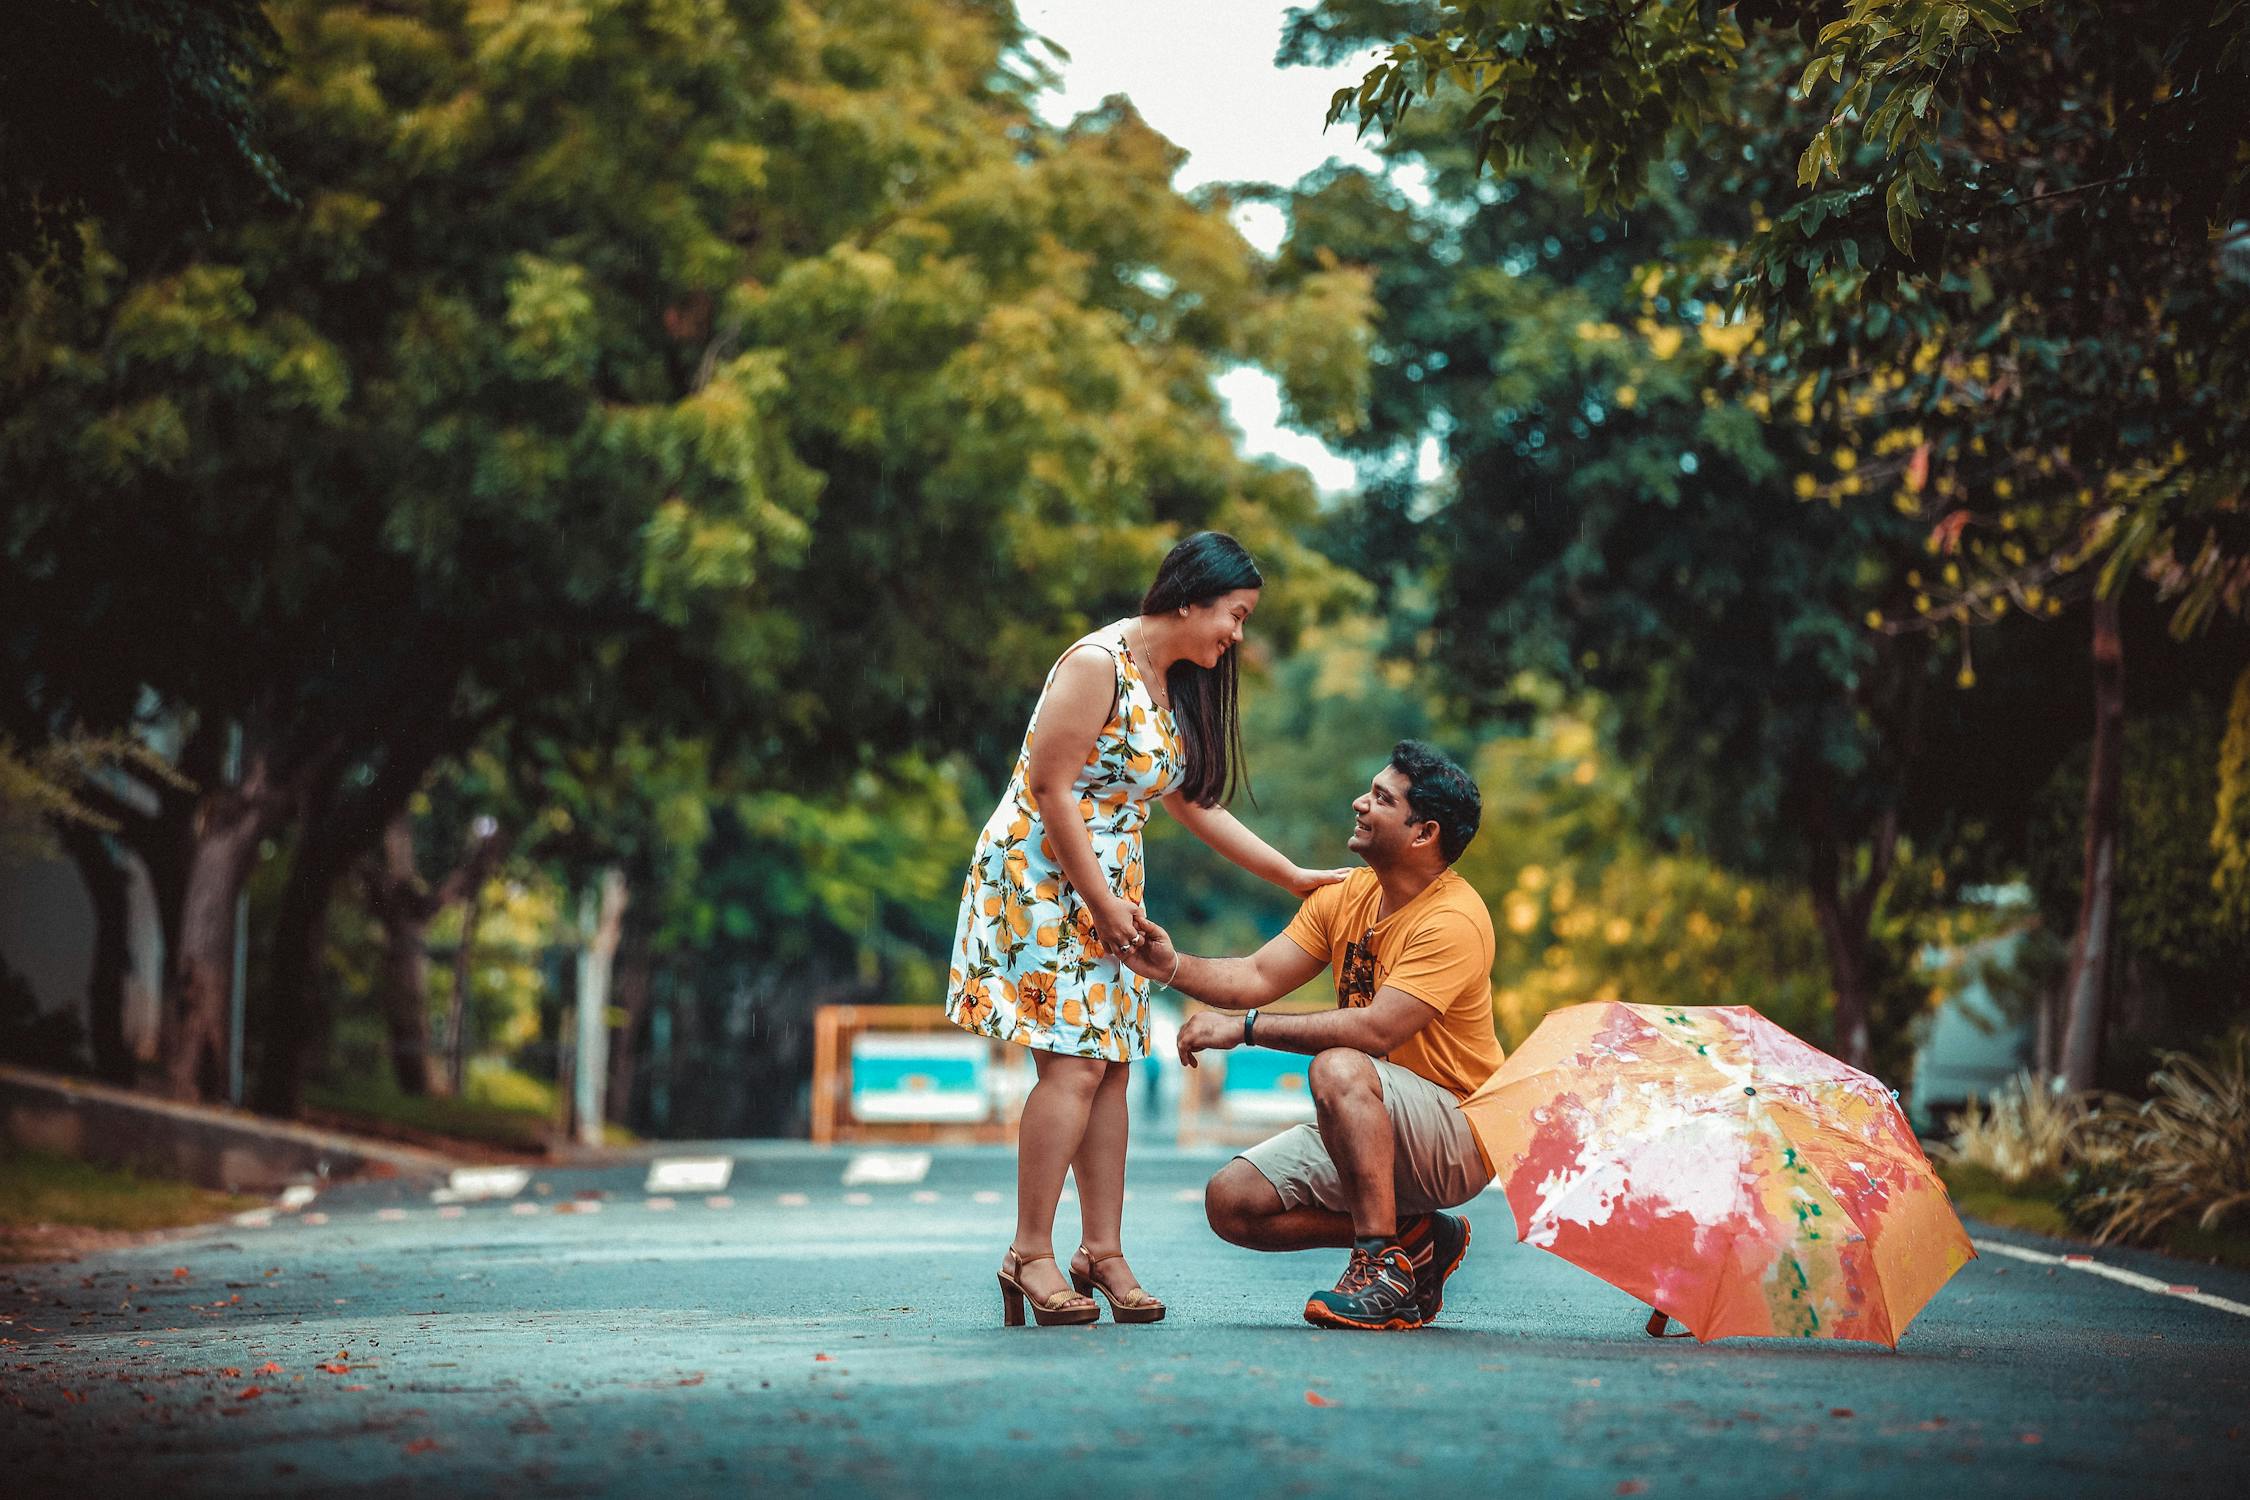 Proposal Photo by Dominic Xavier from Pexels: https://www.pexels.com/photo/man-kneeling-in-front-woman-2226698/